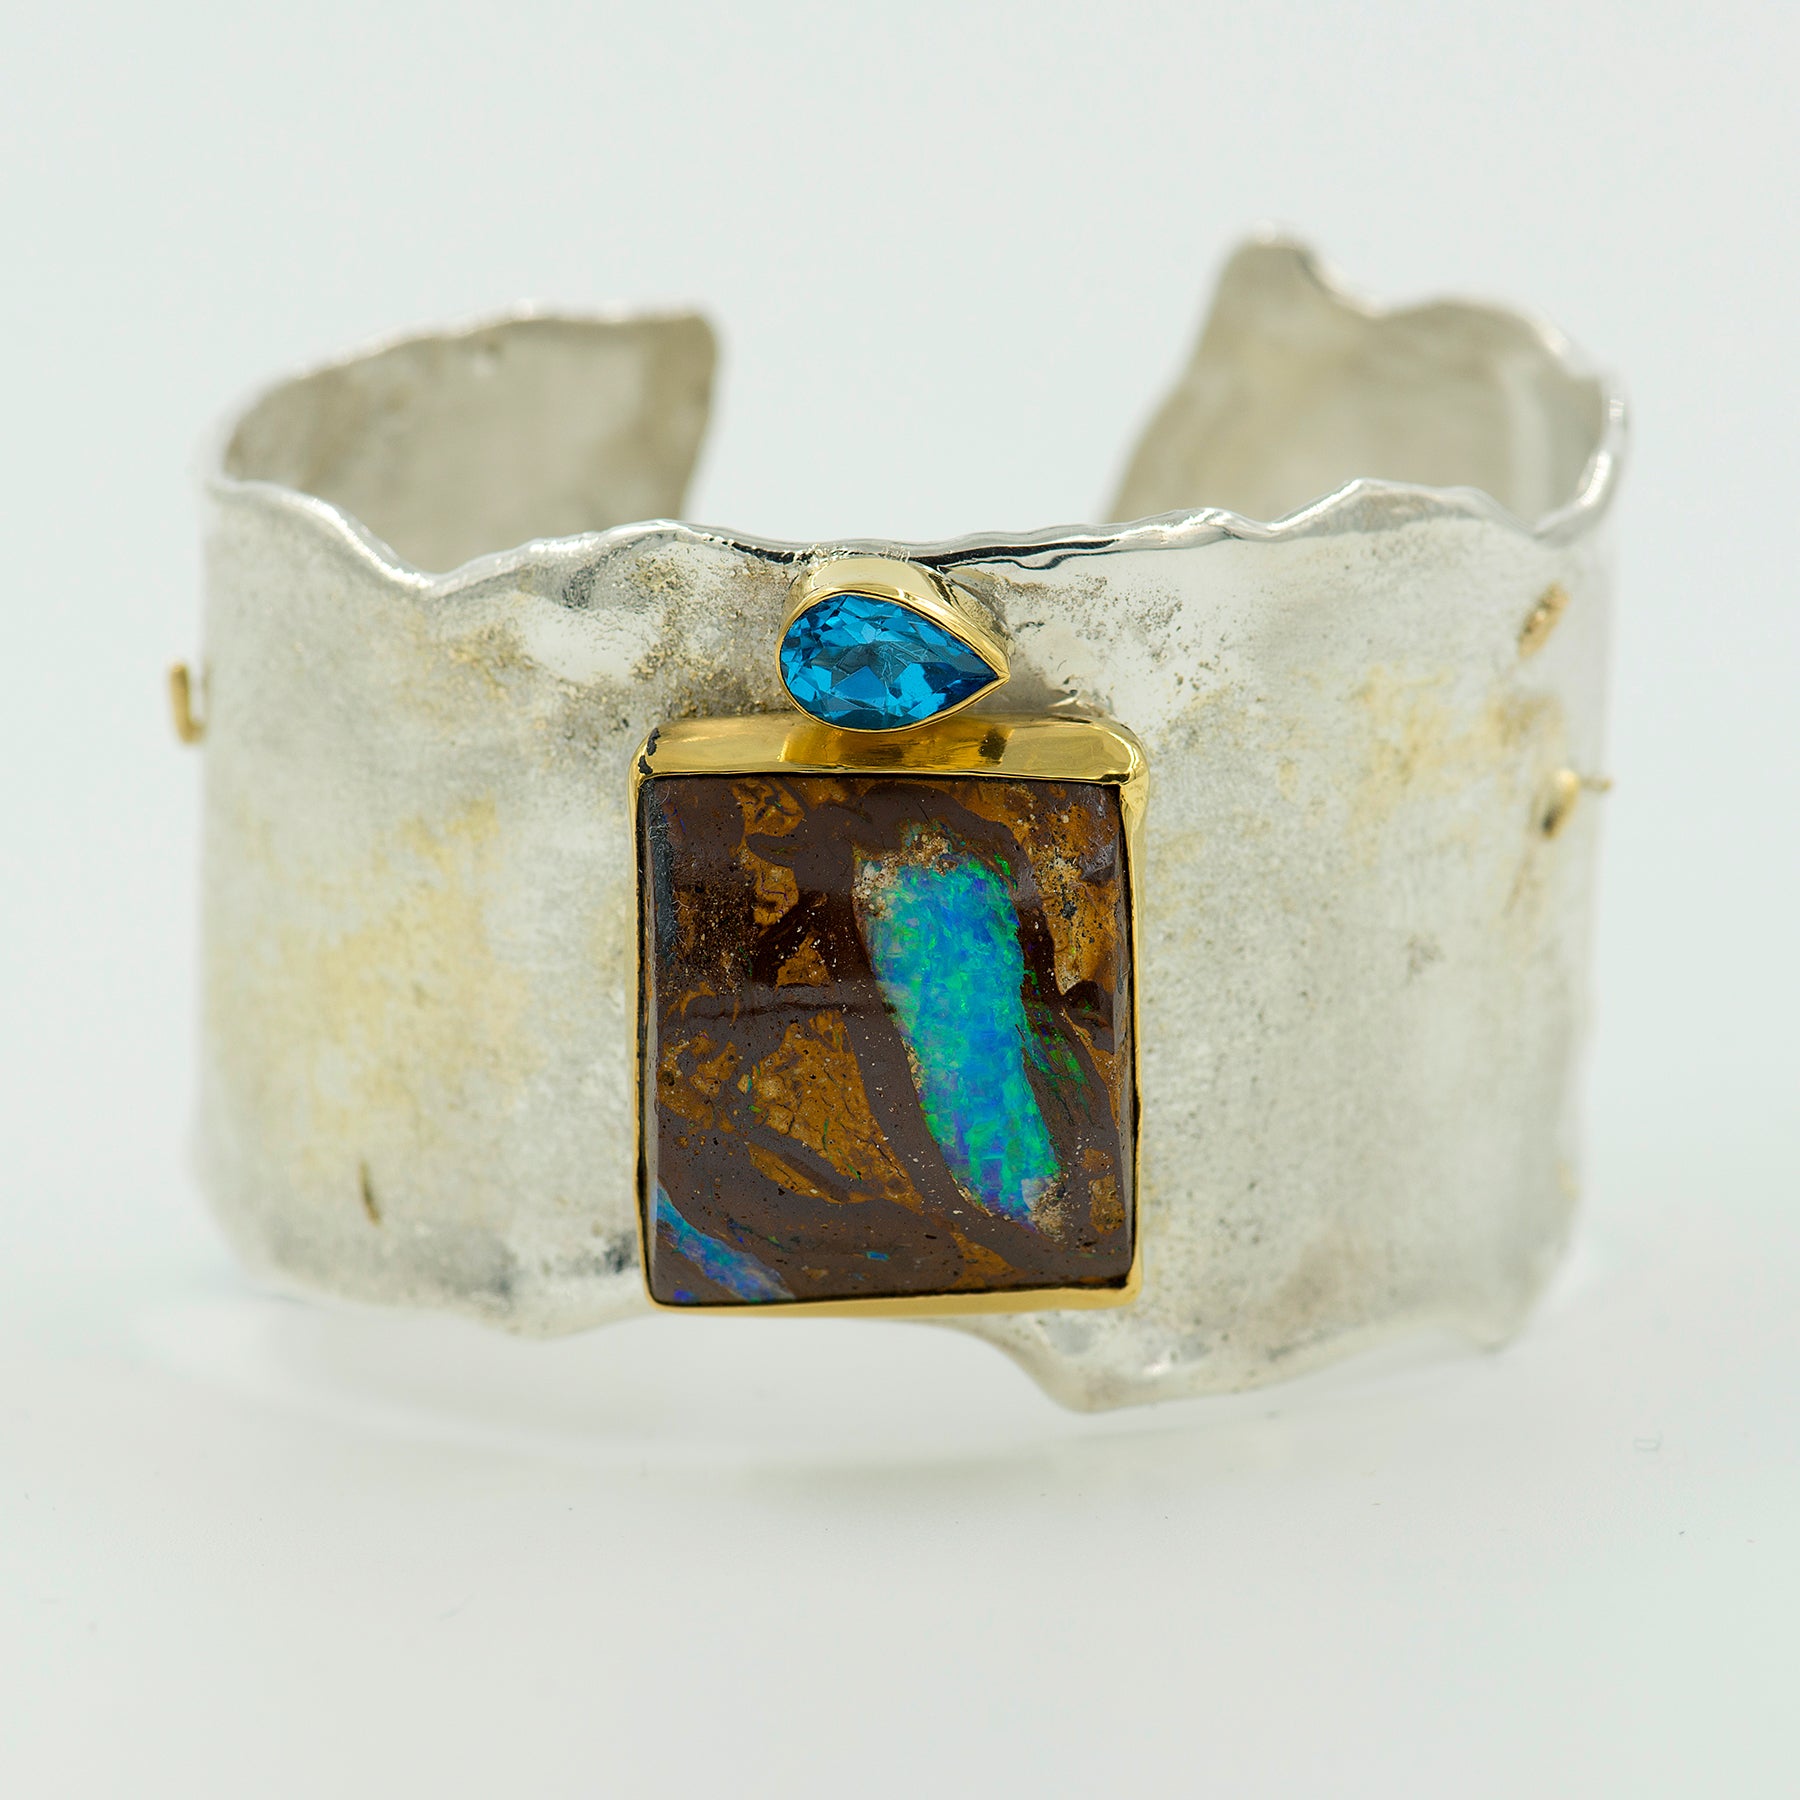 Boulder Opal Cuff Bracelet in Silver and Gold